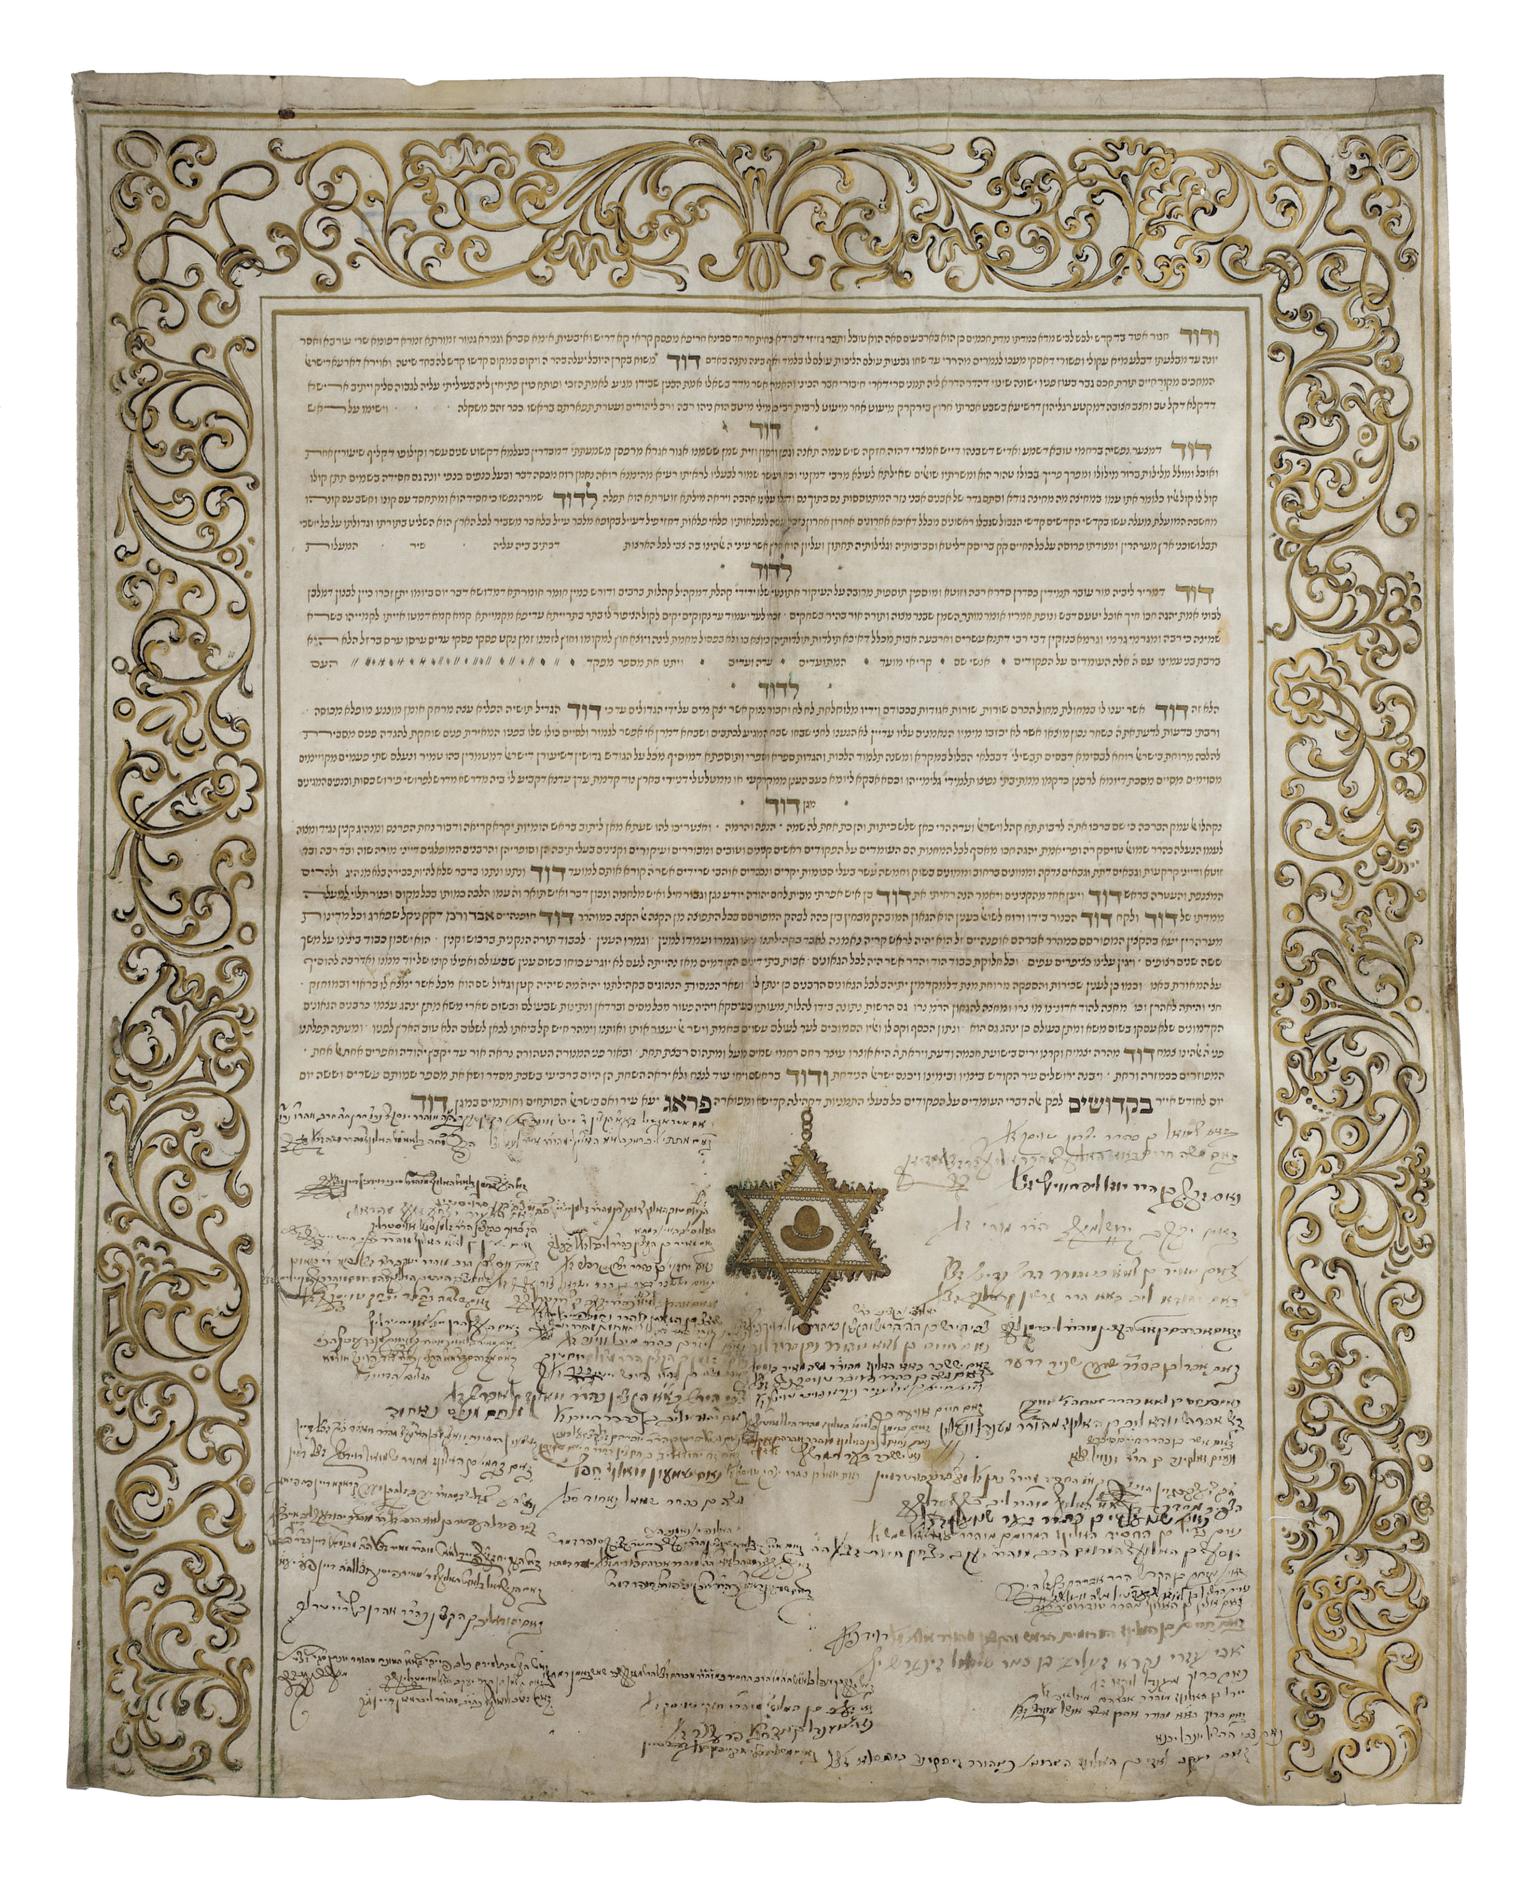 Page with Hebrew text of decorative border and Star of David located in bottom section, with signatures in the Roman alphabet below.